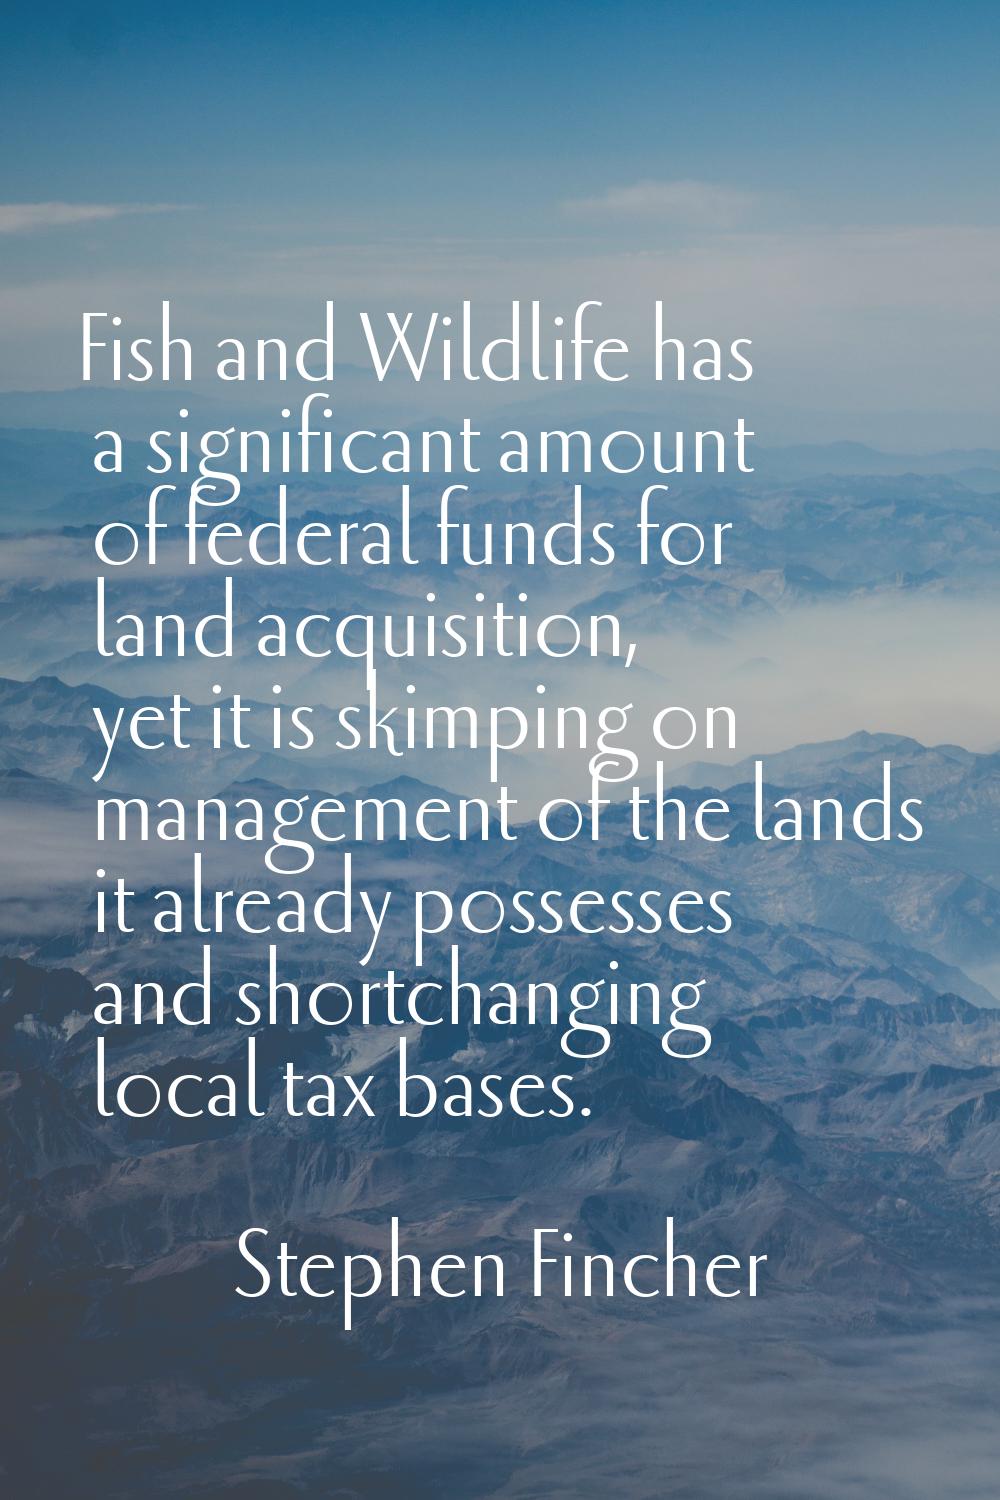 Fish and Wildlife has a significant amount of federal funds for land acquisition, yet it is skimpin